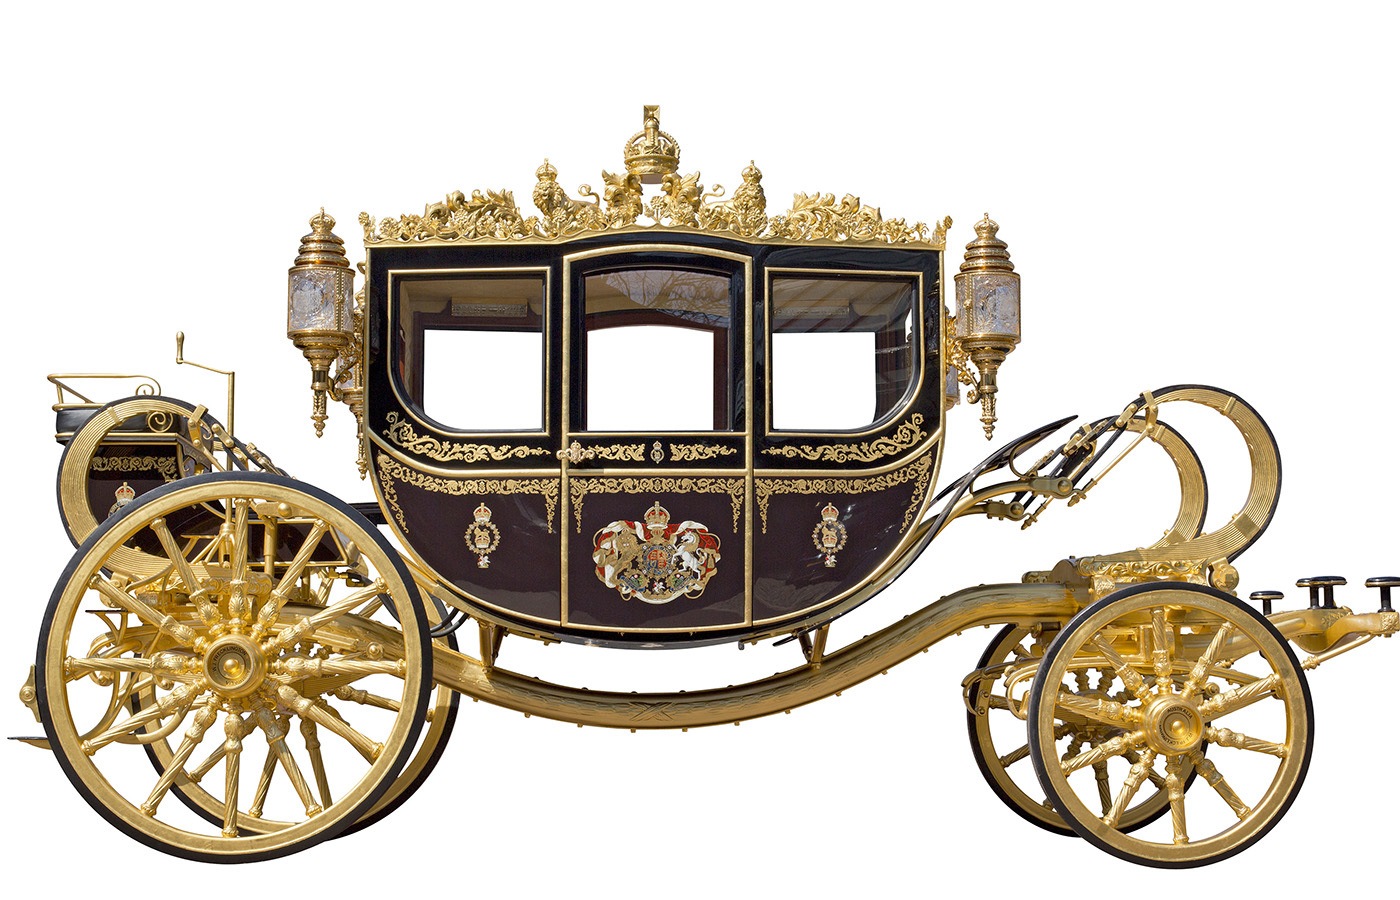 The King and Queen Consort will travel to the coronation in the Diamond Jubilee State Coach.